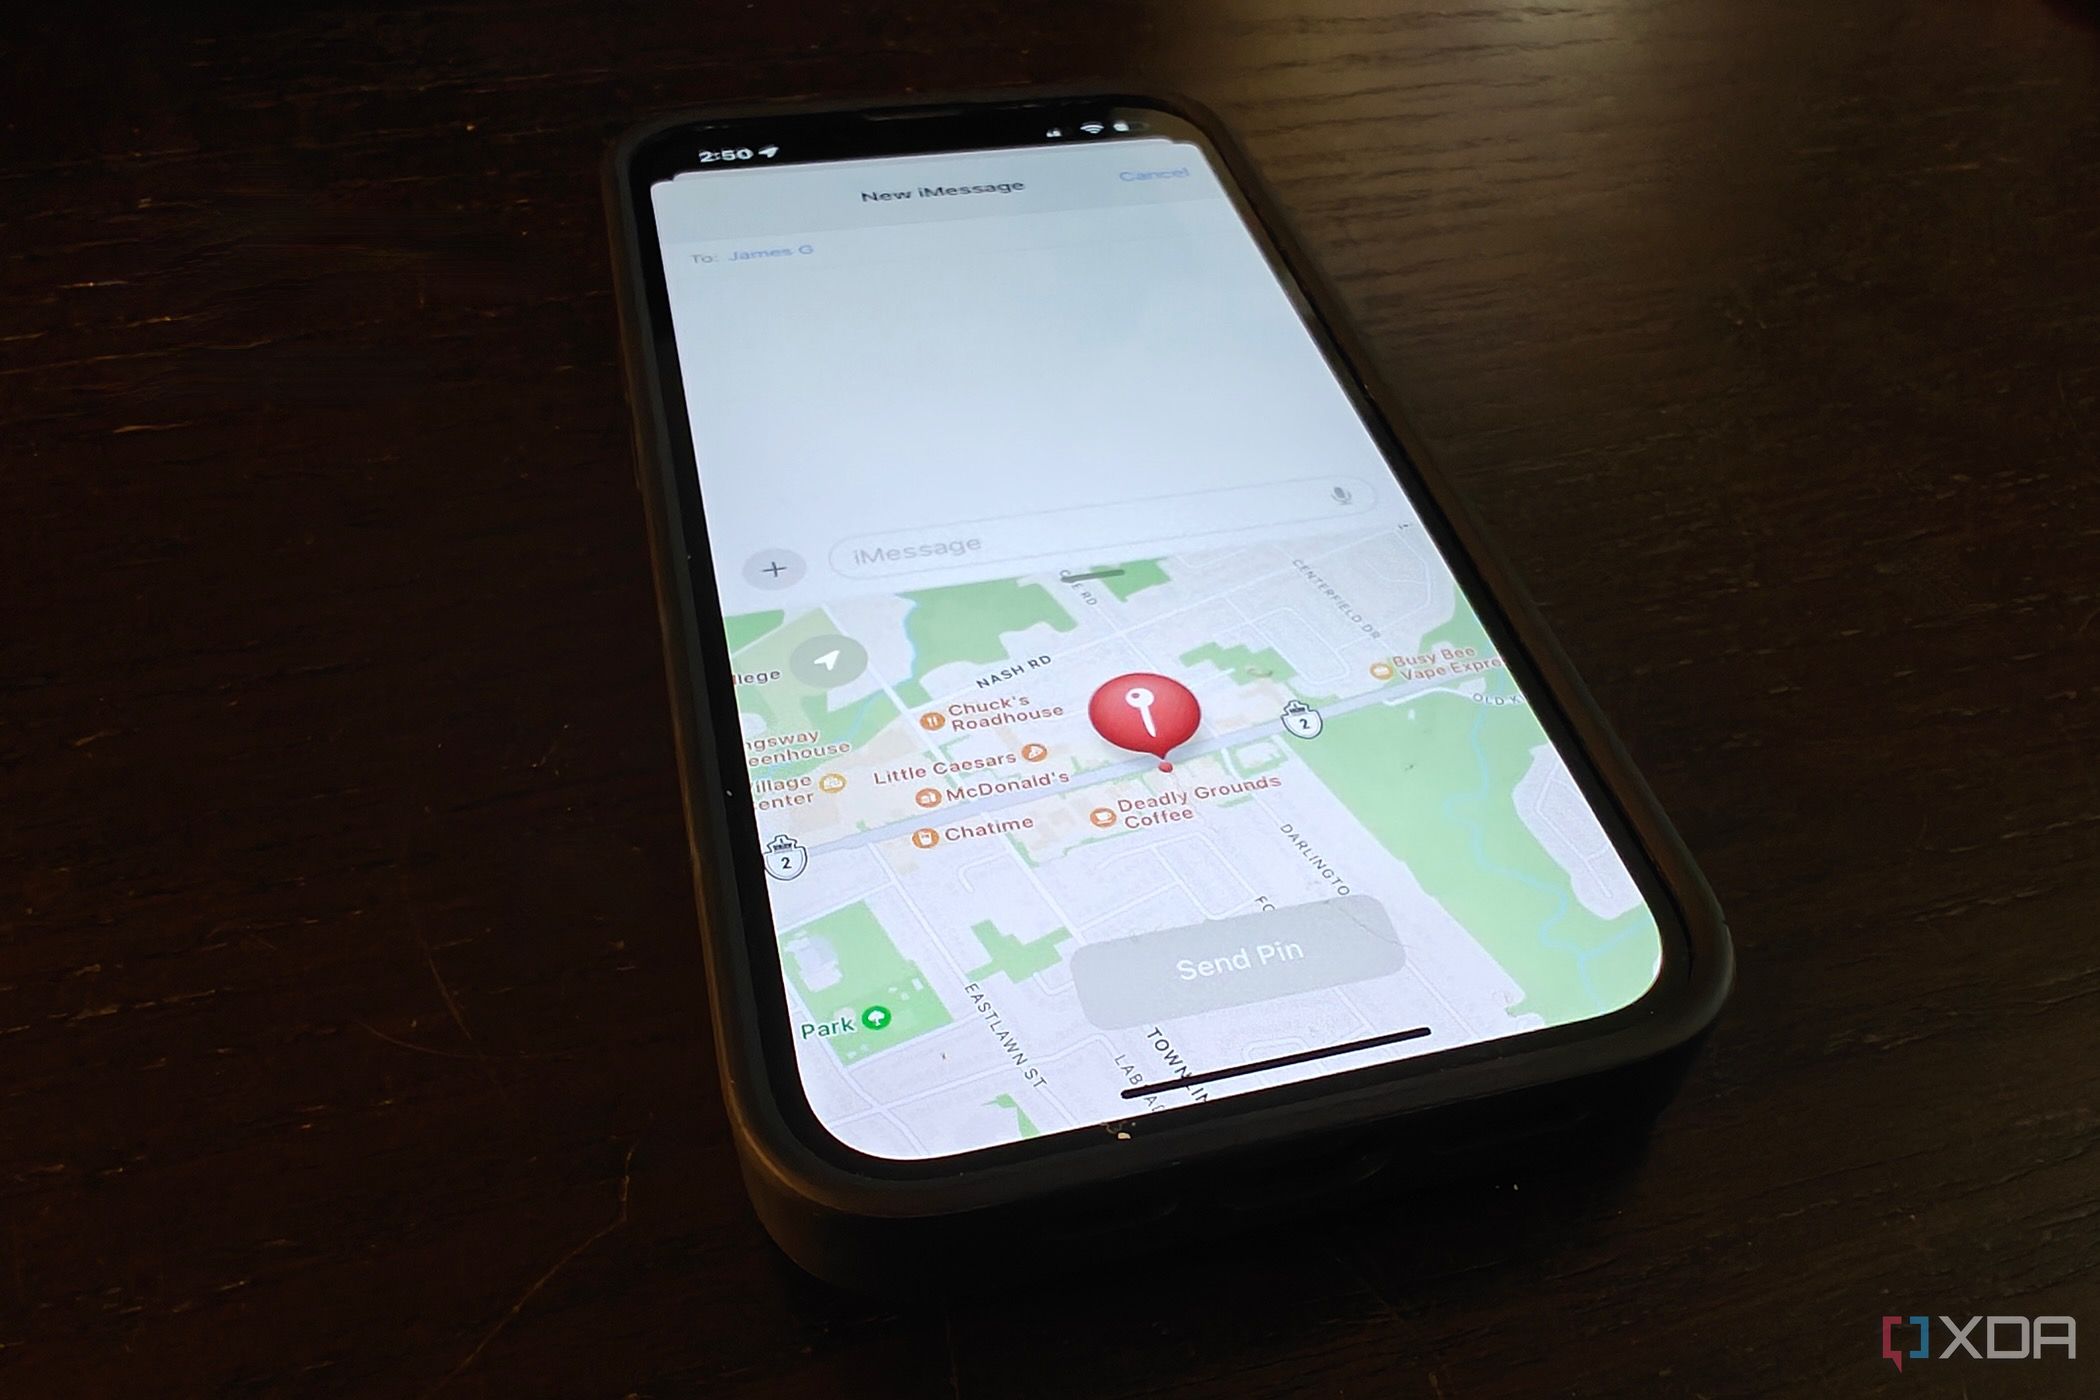 How to send your location to someone via iPhone